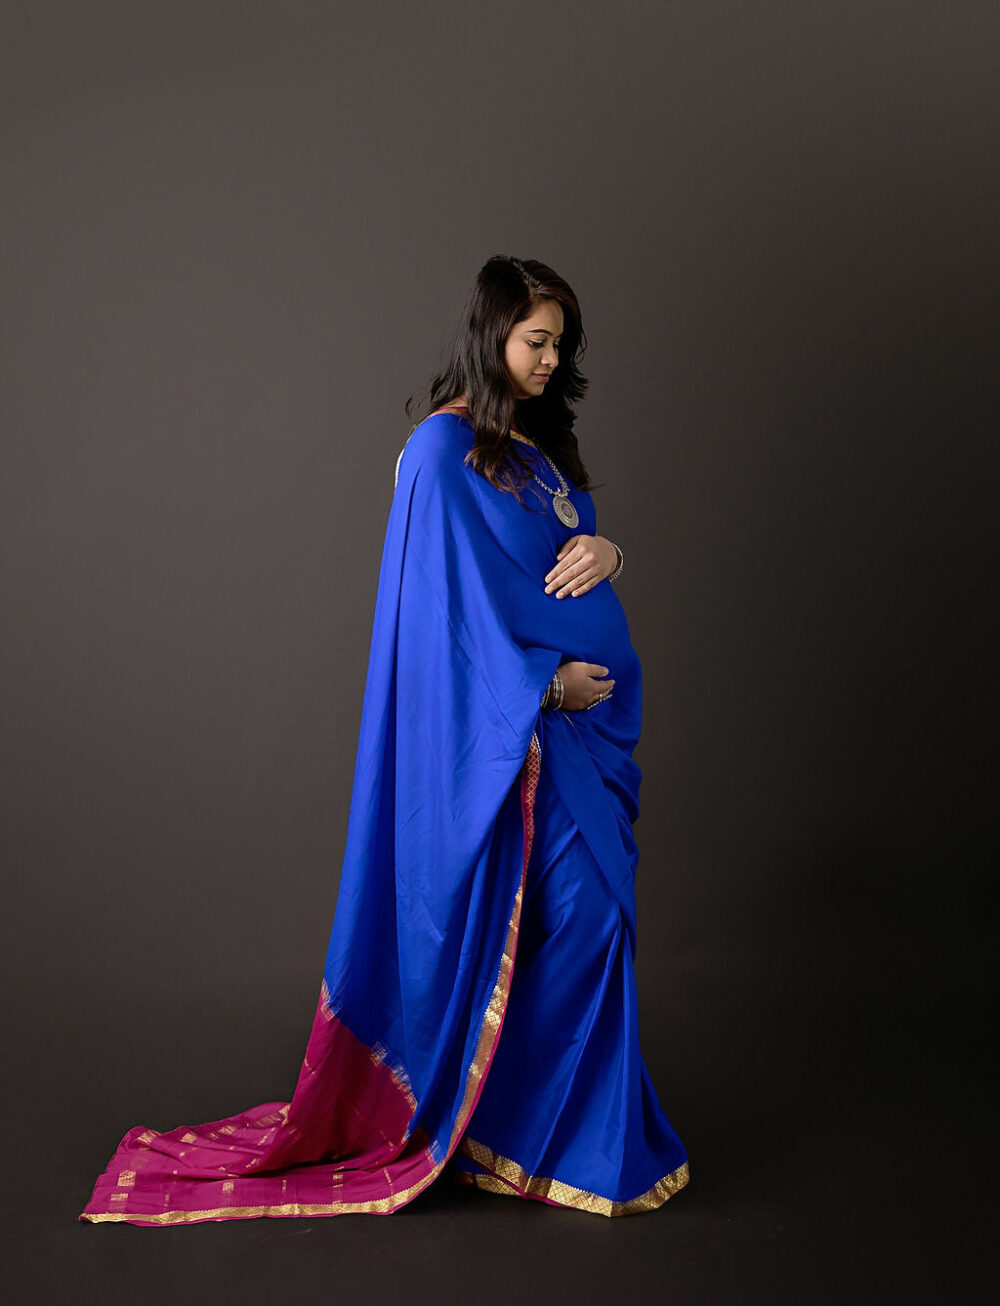 Vinus Images - Family photoshoot and Potraits in Delhi NCR